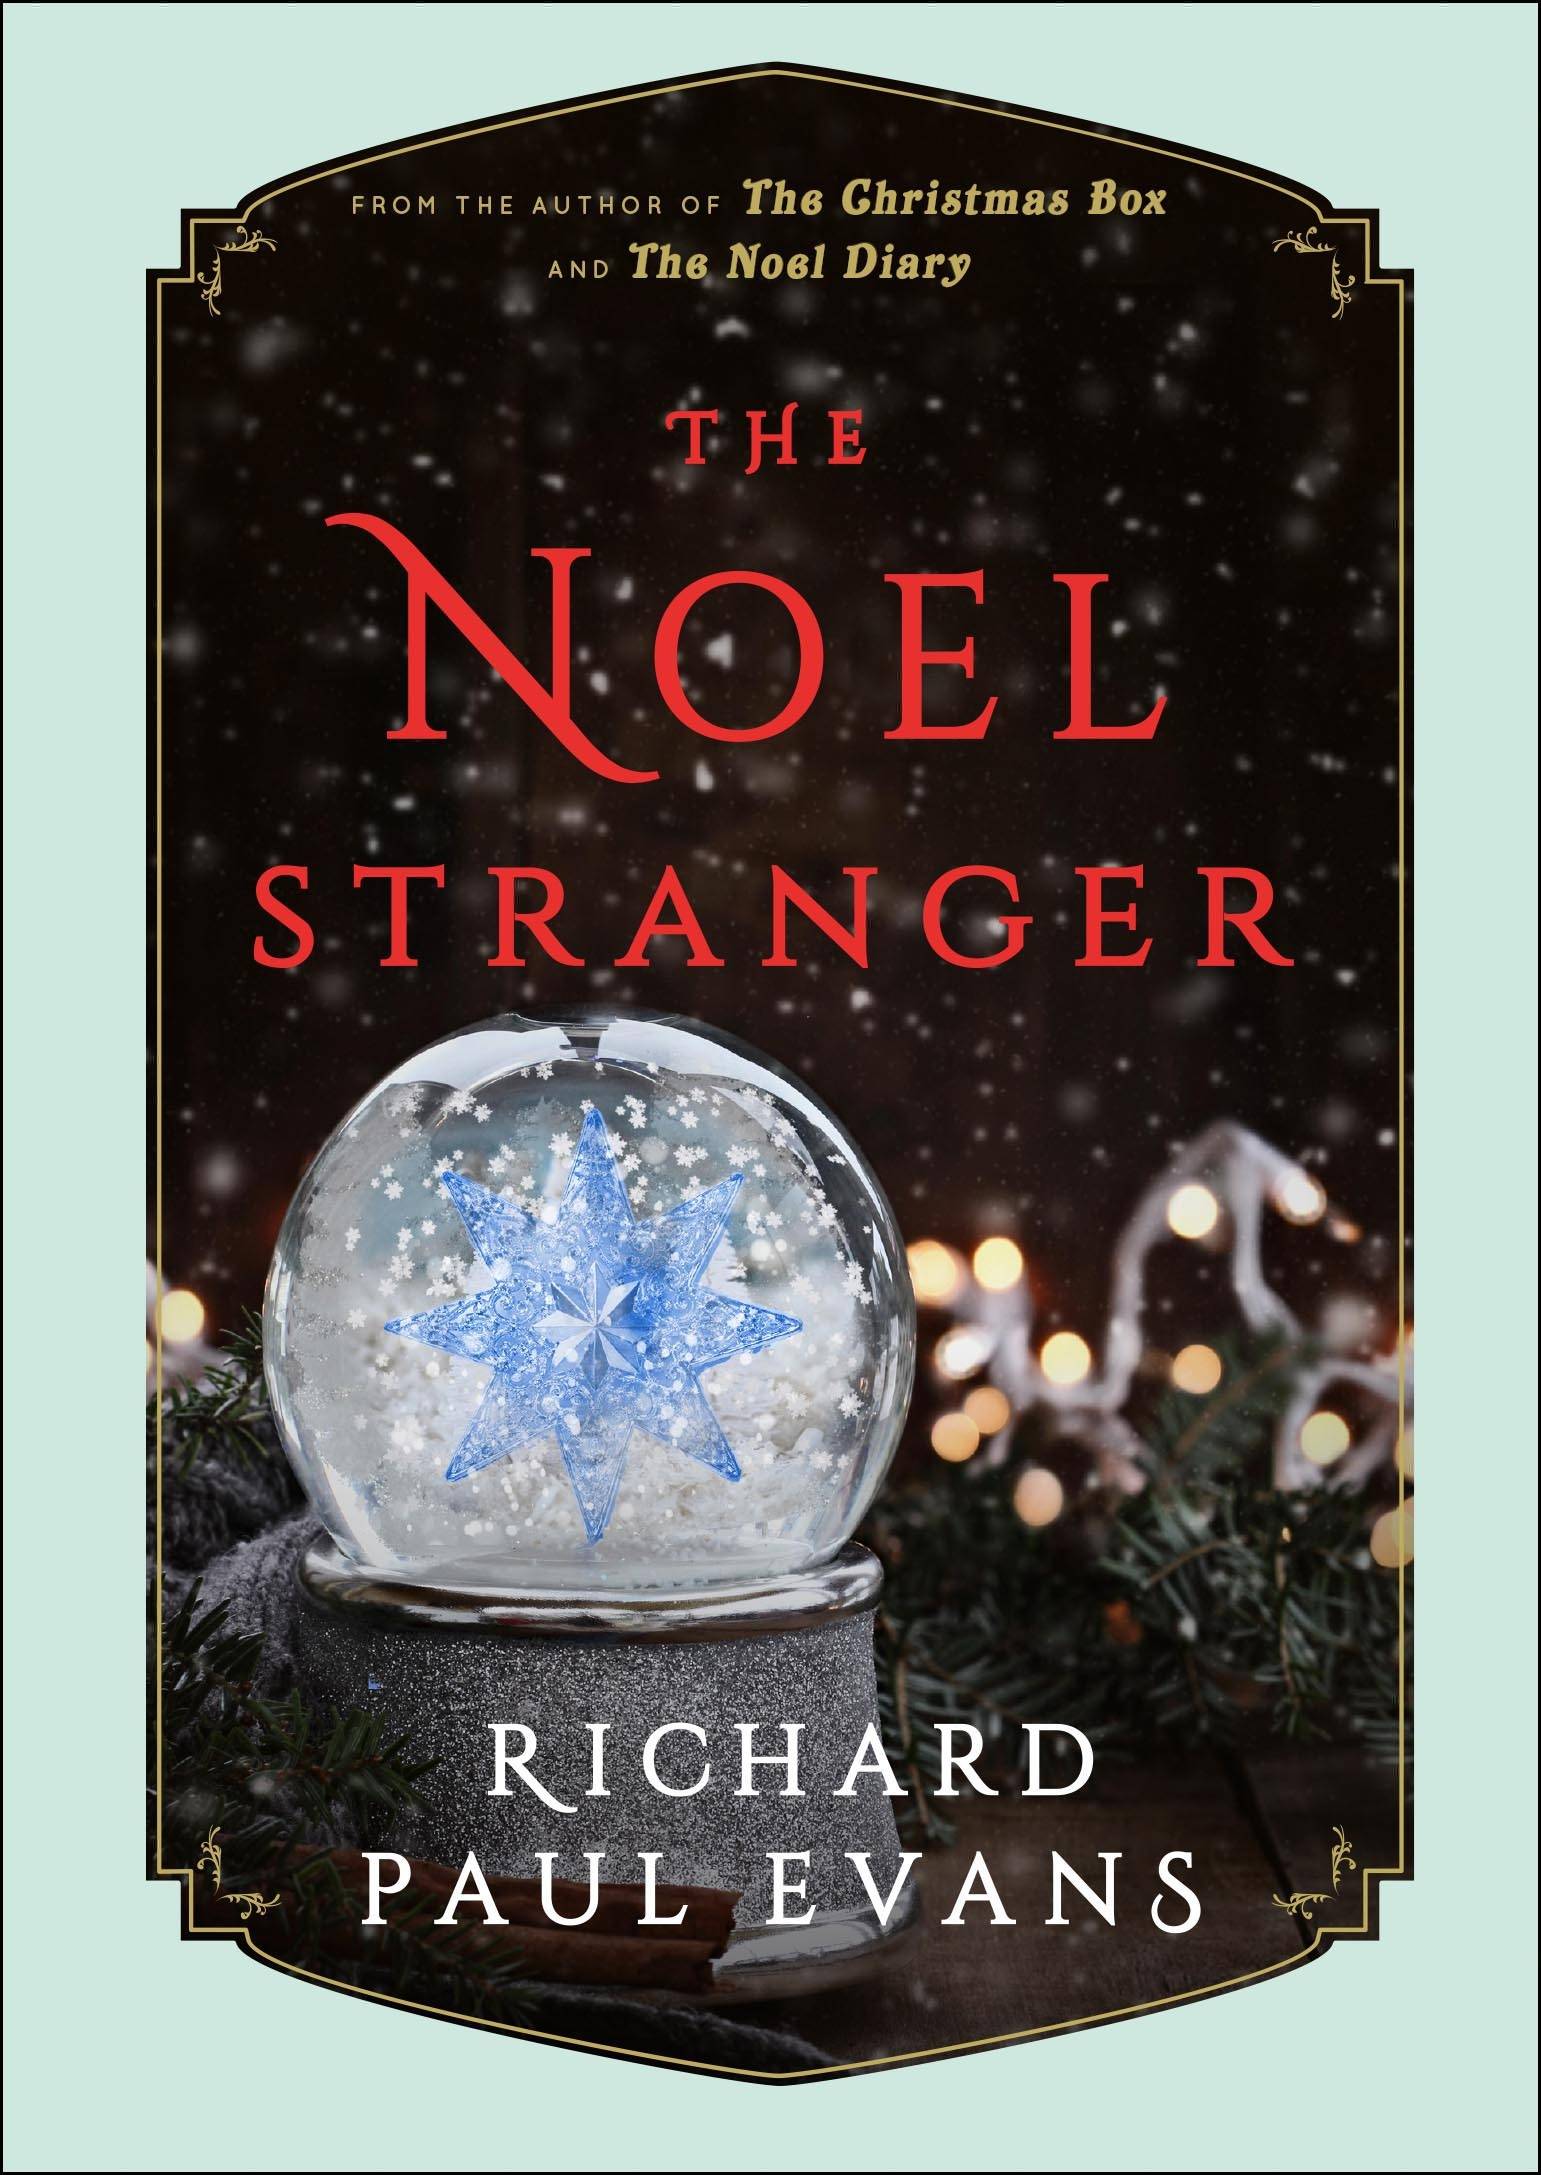 ‘The Noel Stranger’ — a familiar, yet cozy holiday tale